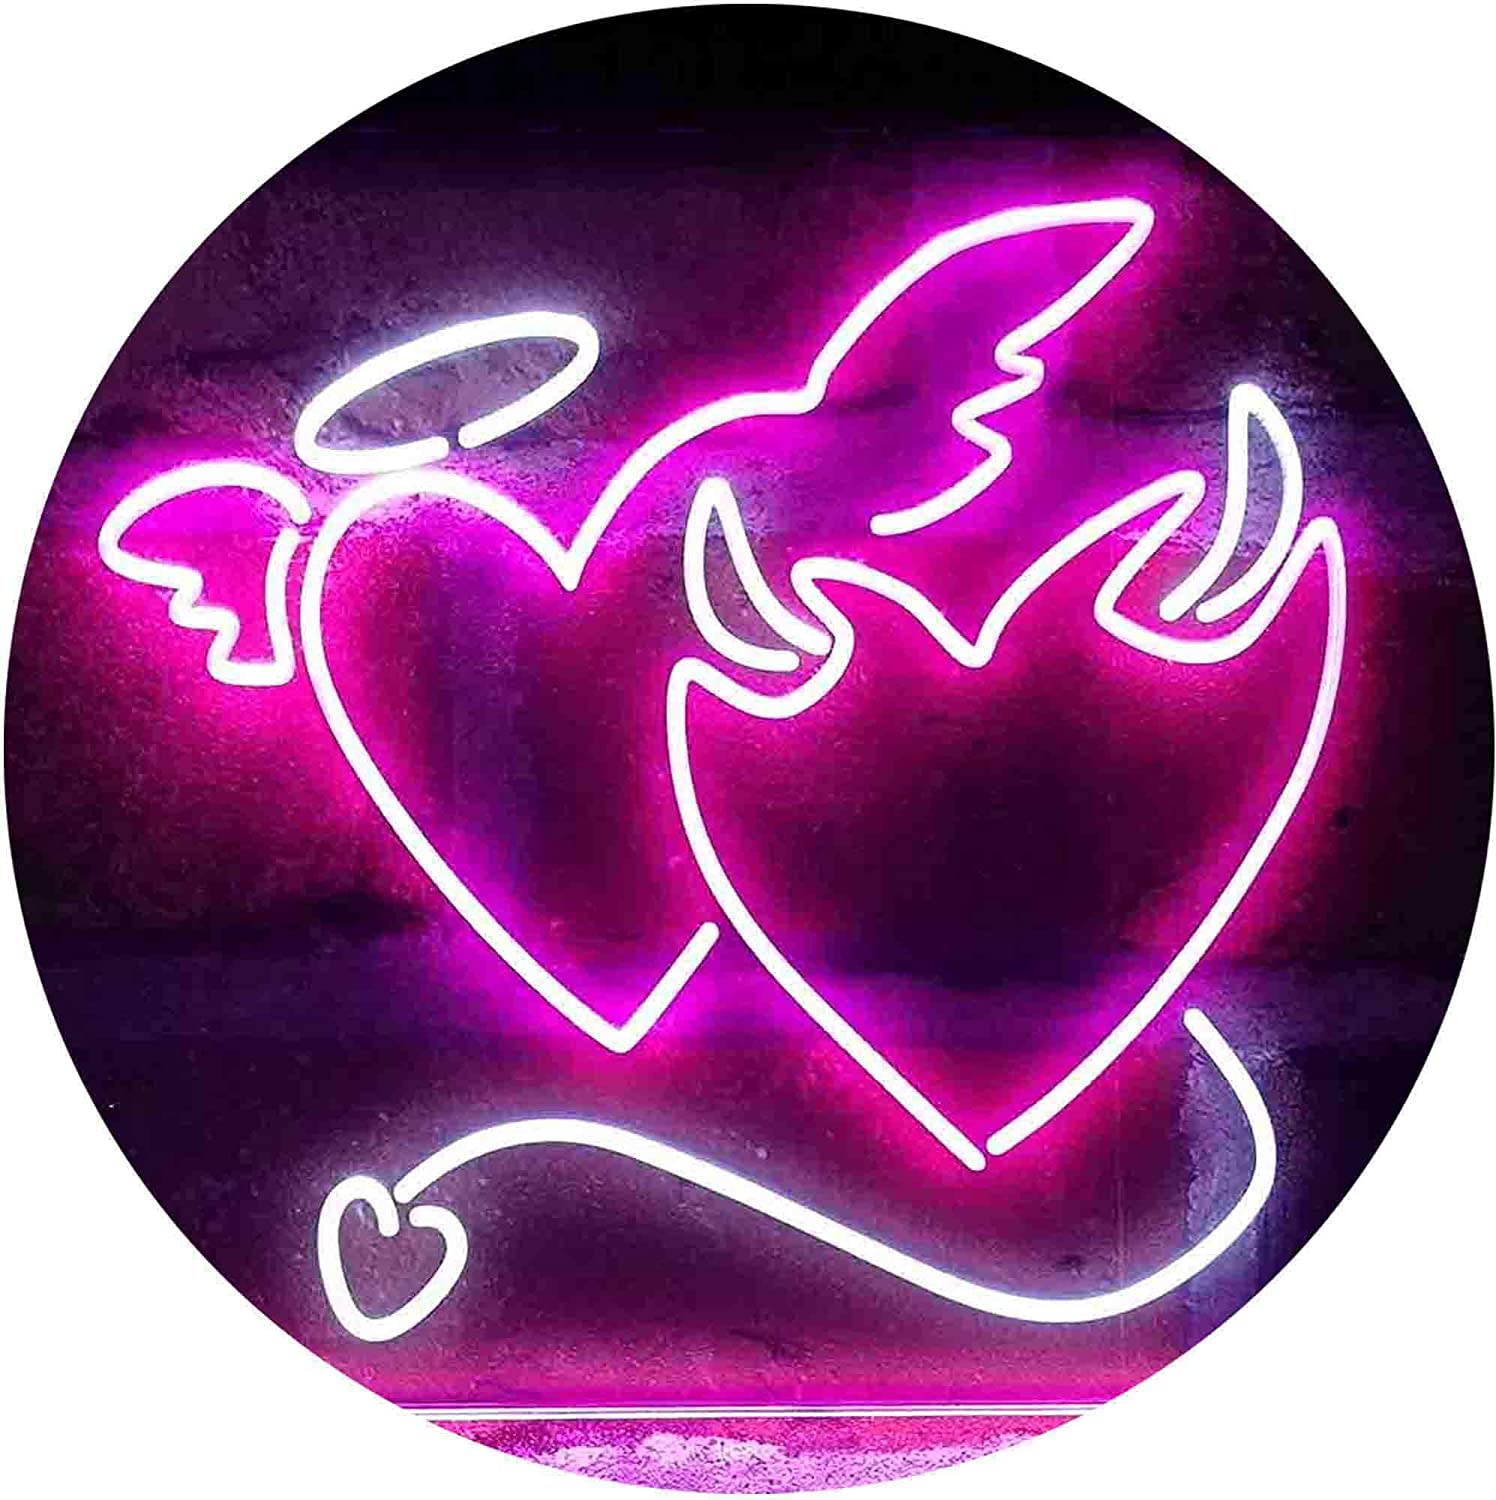 ADVPRO Angel And Devil Heart Love Dual Color LED Neon Sign White & Purple 24 X 16 Inches St6s64 I4056 Wp, Tools & Home Improvement